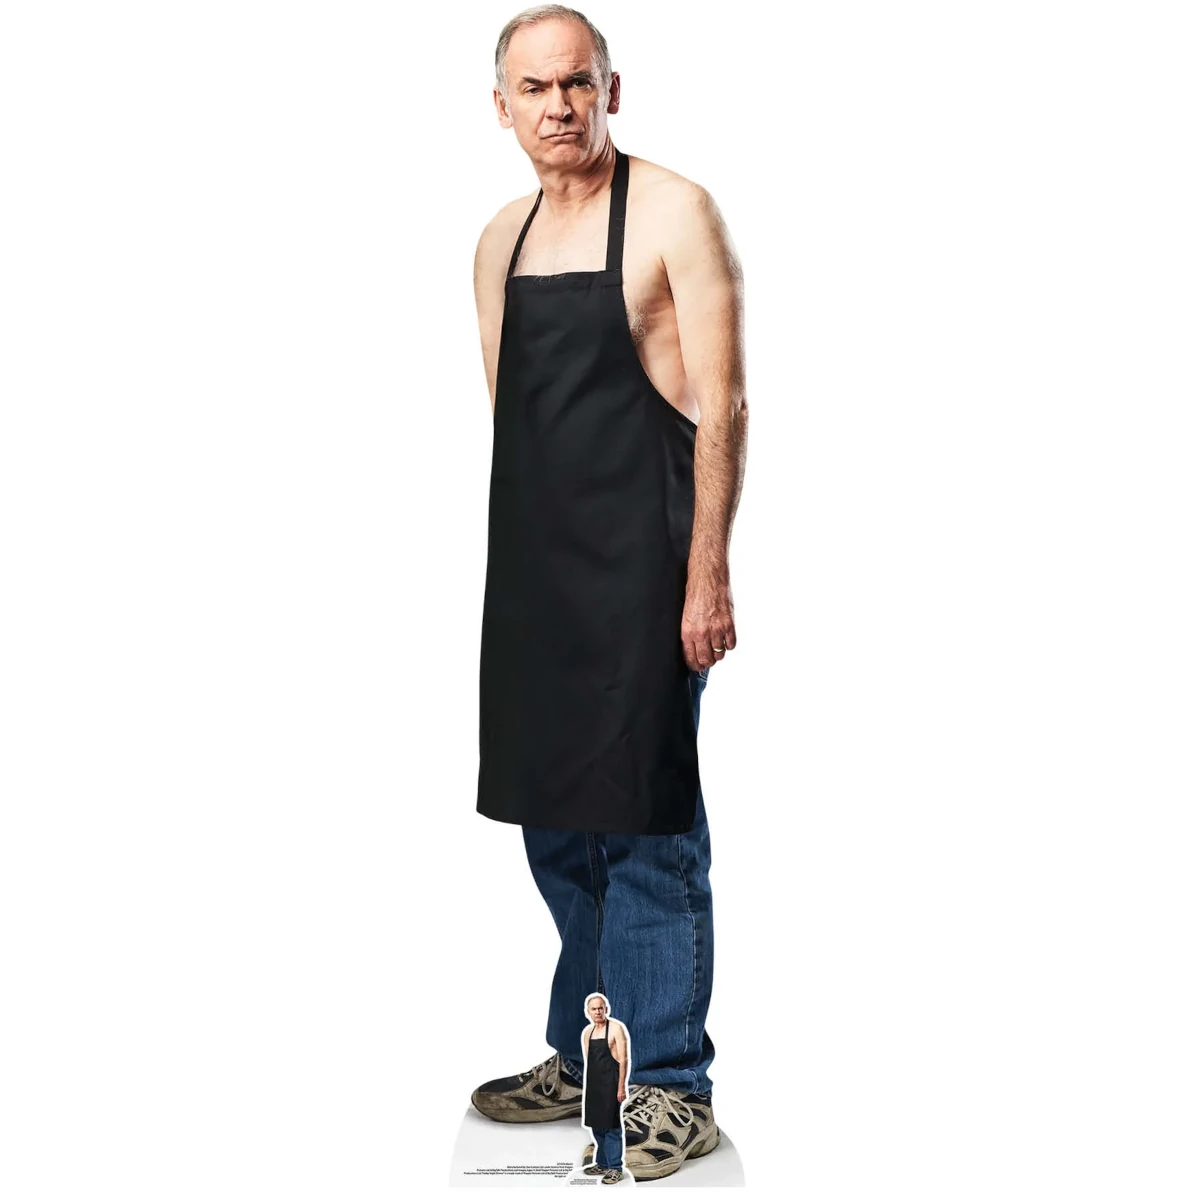 SC1576 Martin (Friday Night Dinner) Official Lifesize + Mini Cardboard Cutout Standee Front